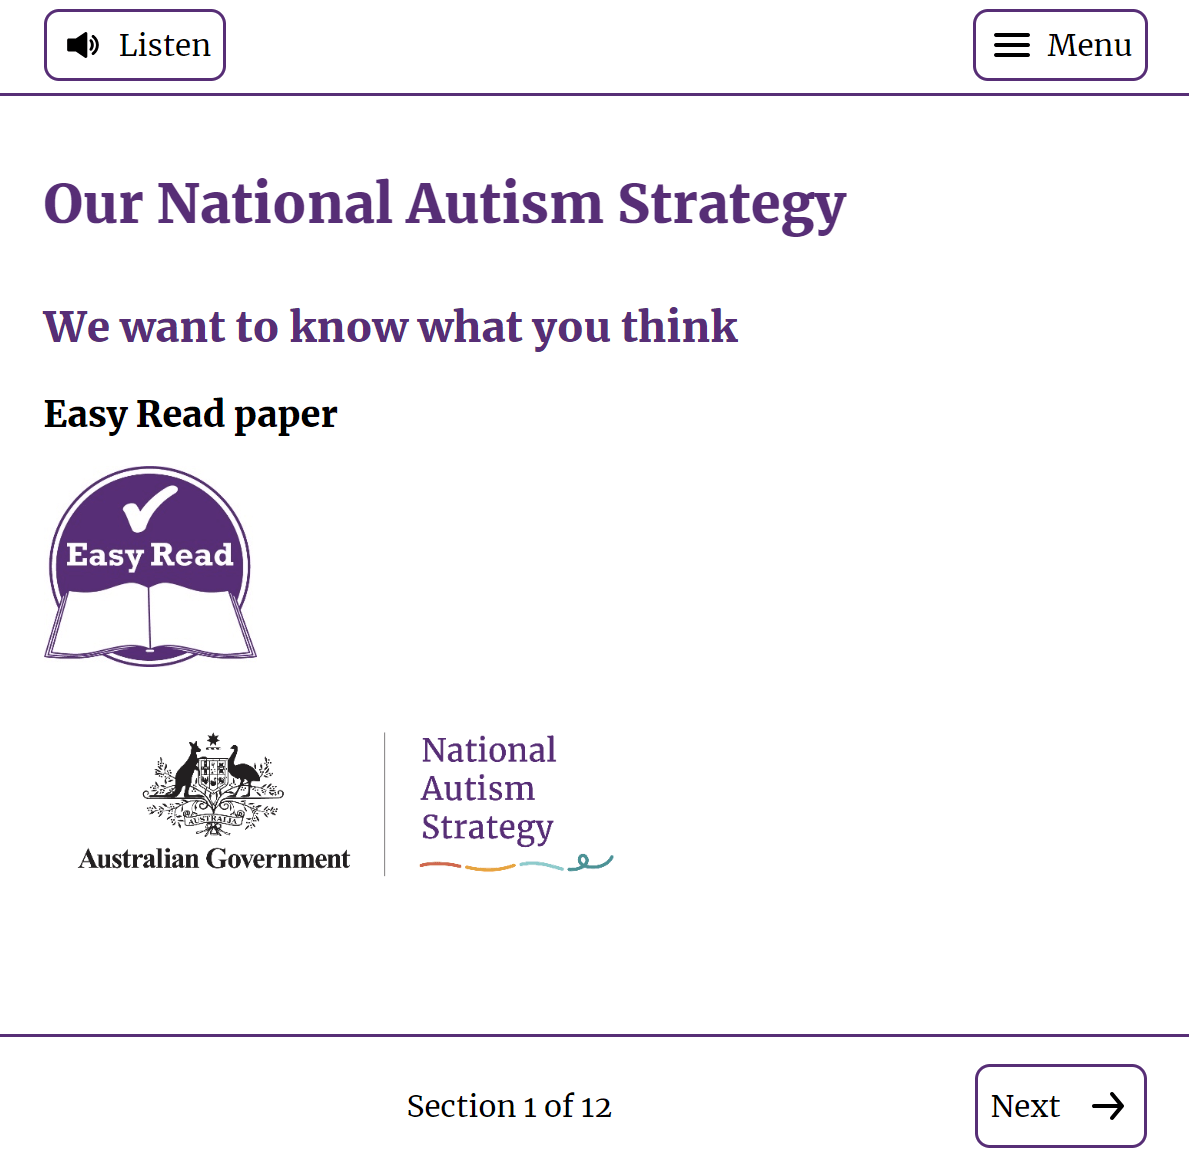 [Australie] “Our National Autism Strategy – We want to know what you think” (Australian Government)